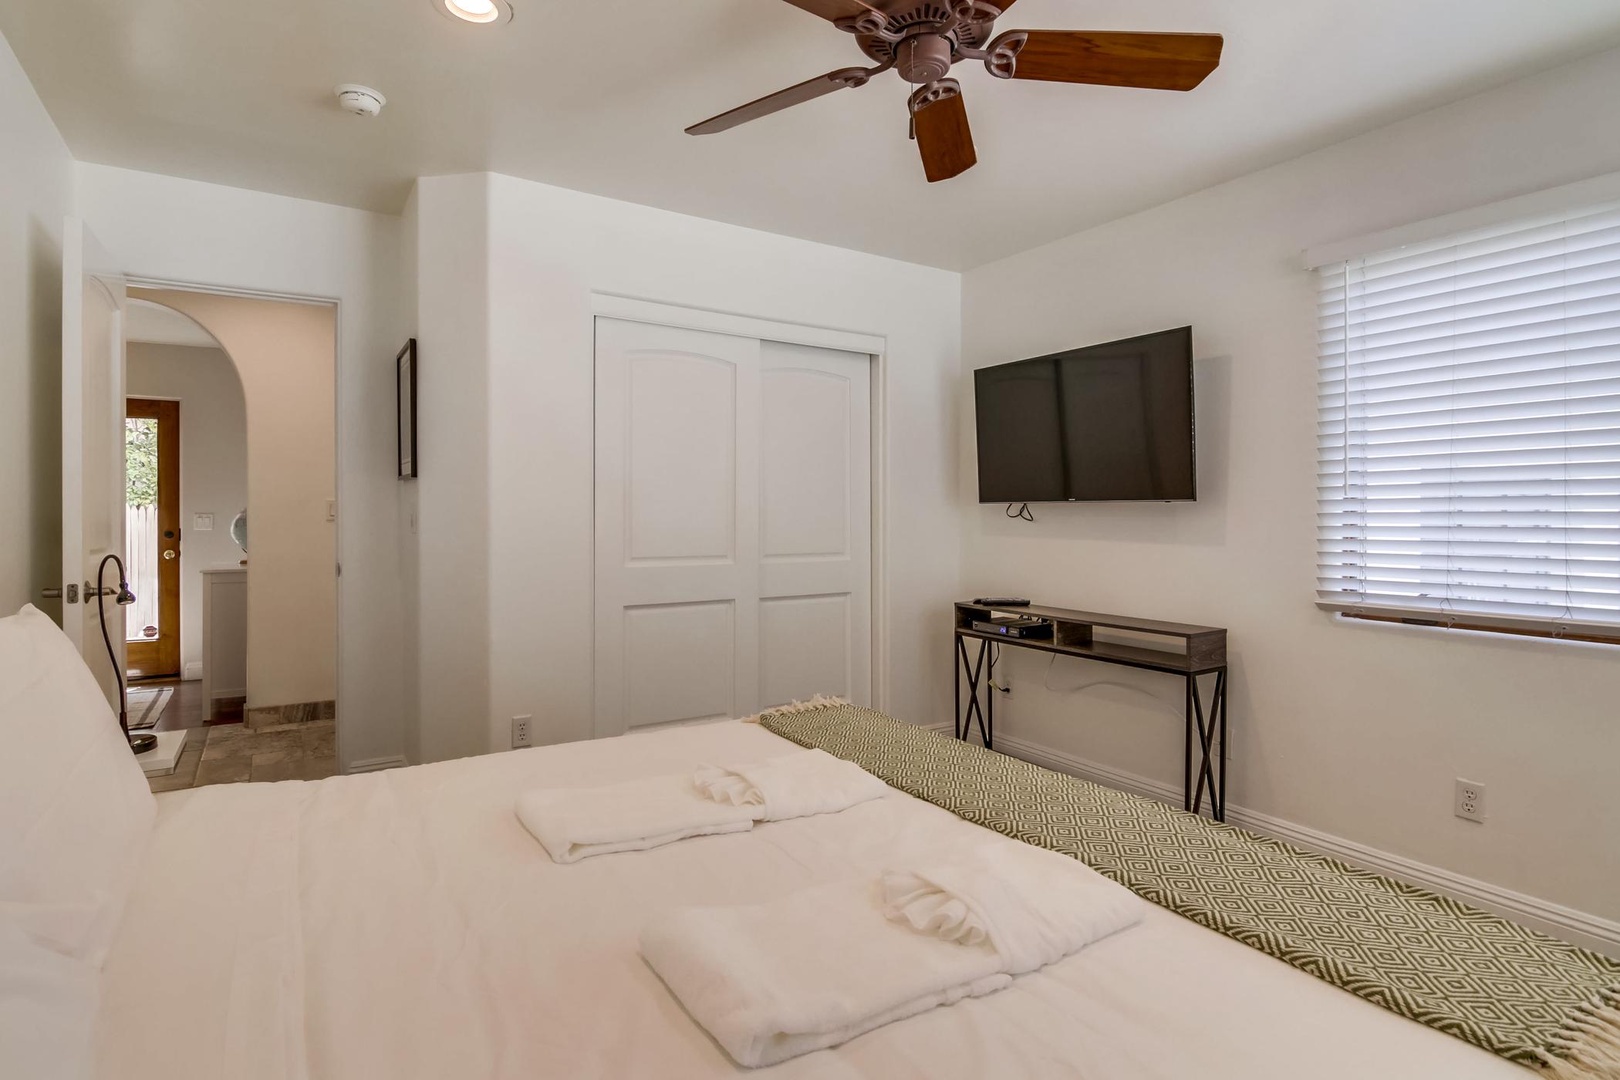 Features a ceiling fan and TV